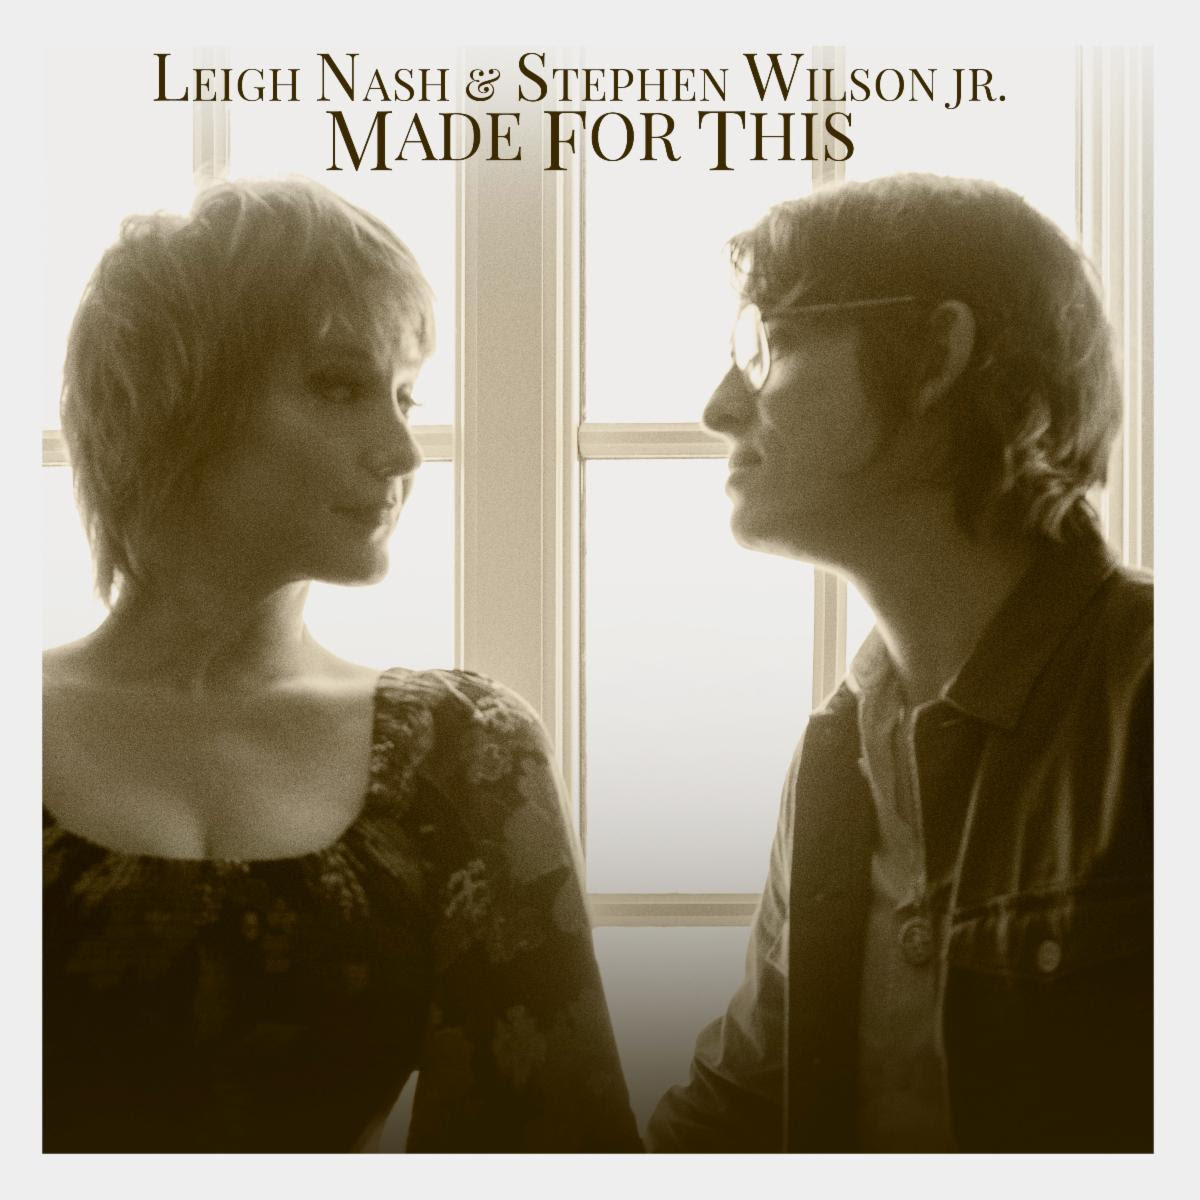 Leigh Nash and Stephen Wilson Jr. (Image courtesy of The Press House)